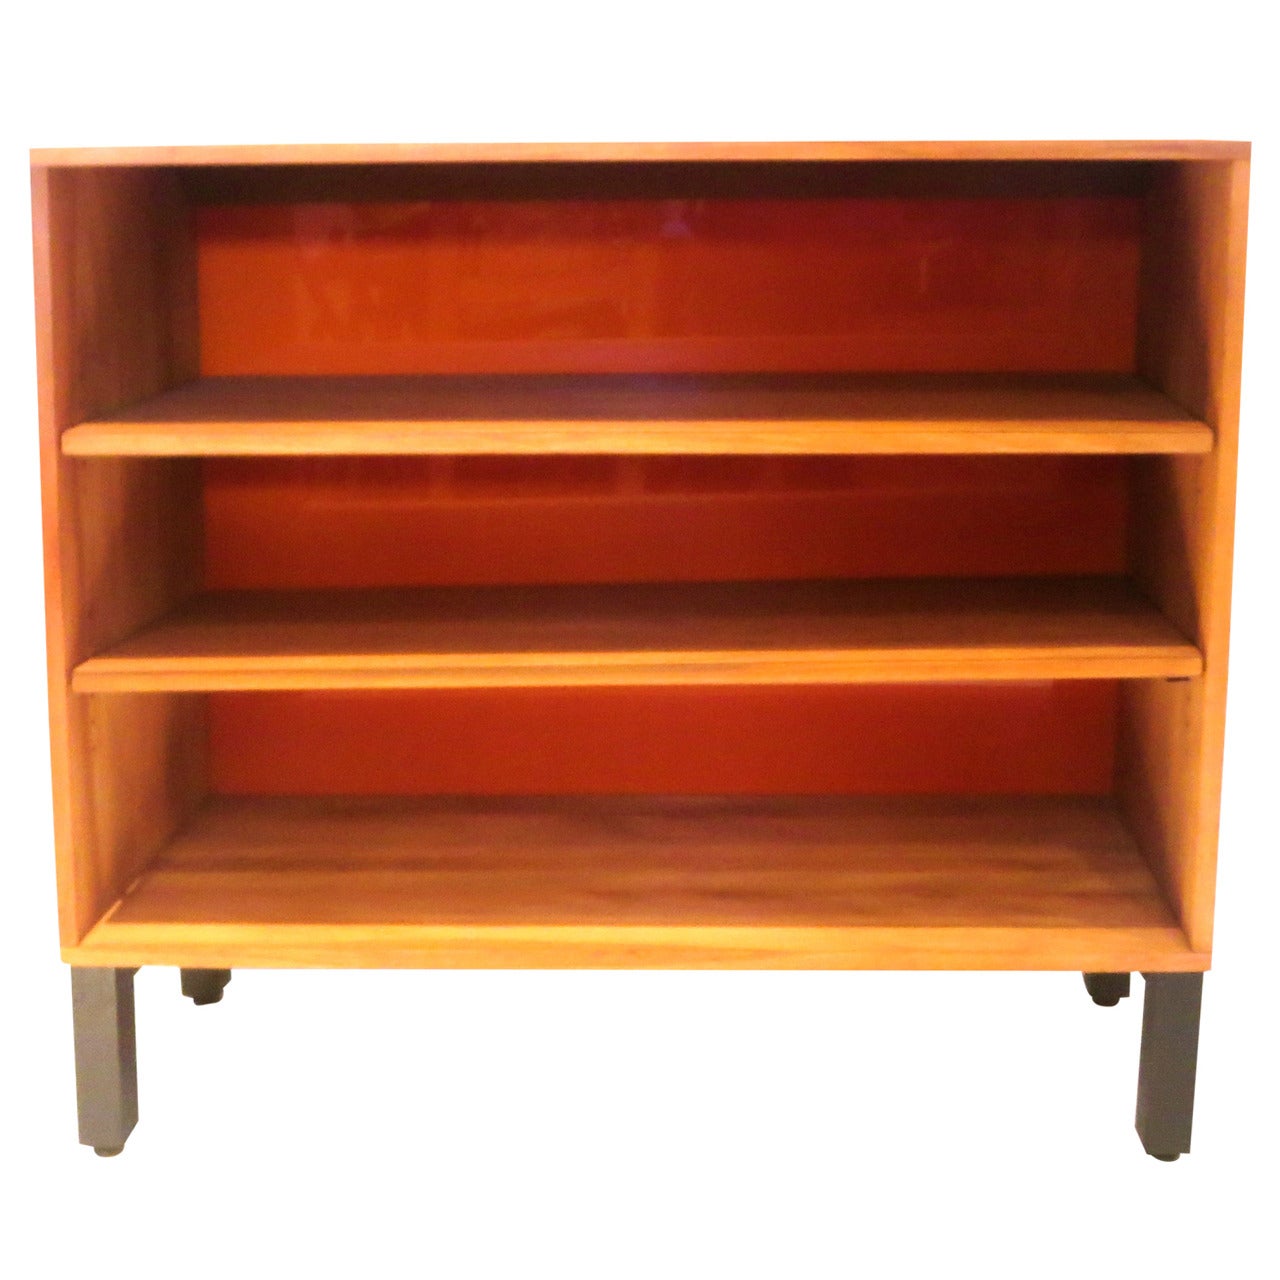 American Modern 1950s  solid ash wood book caze with orange back.